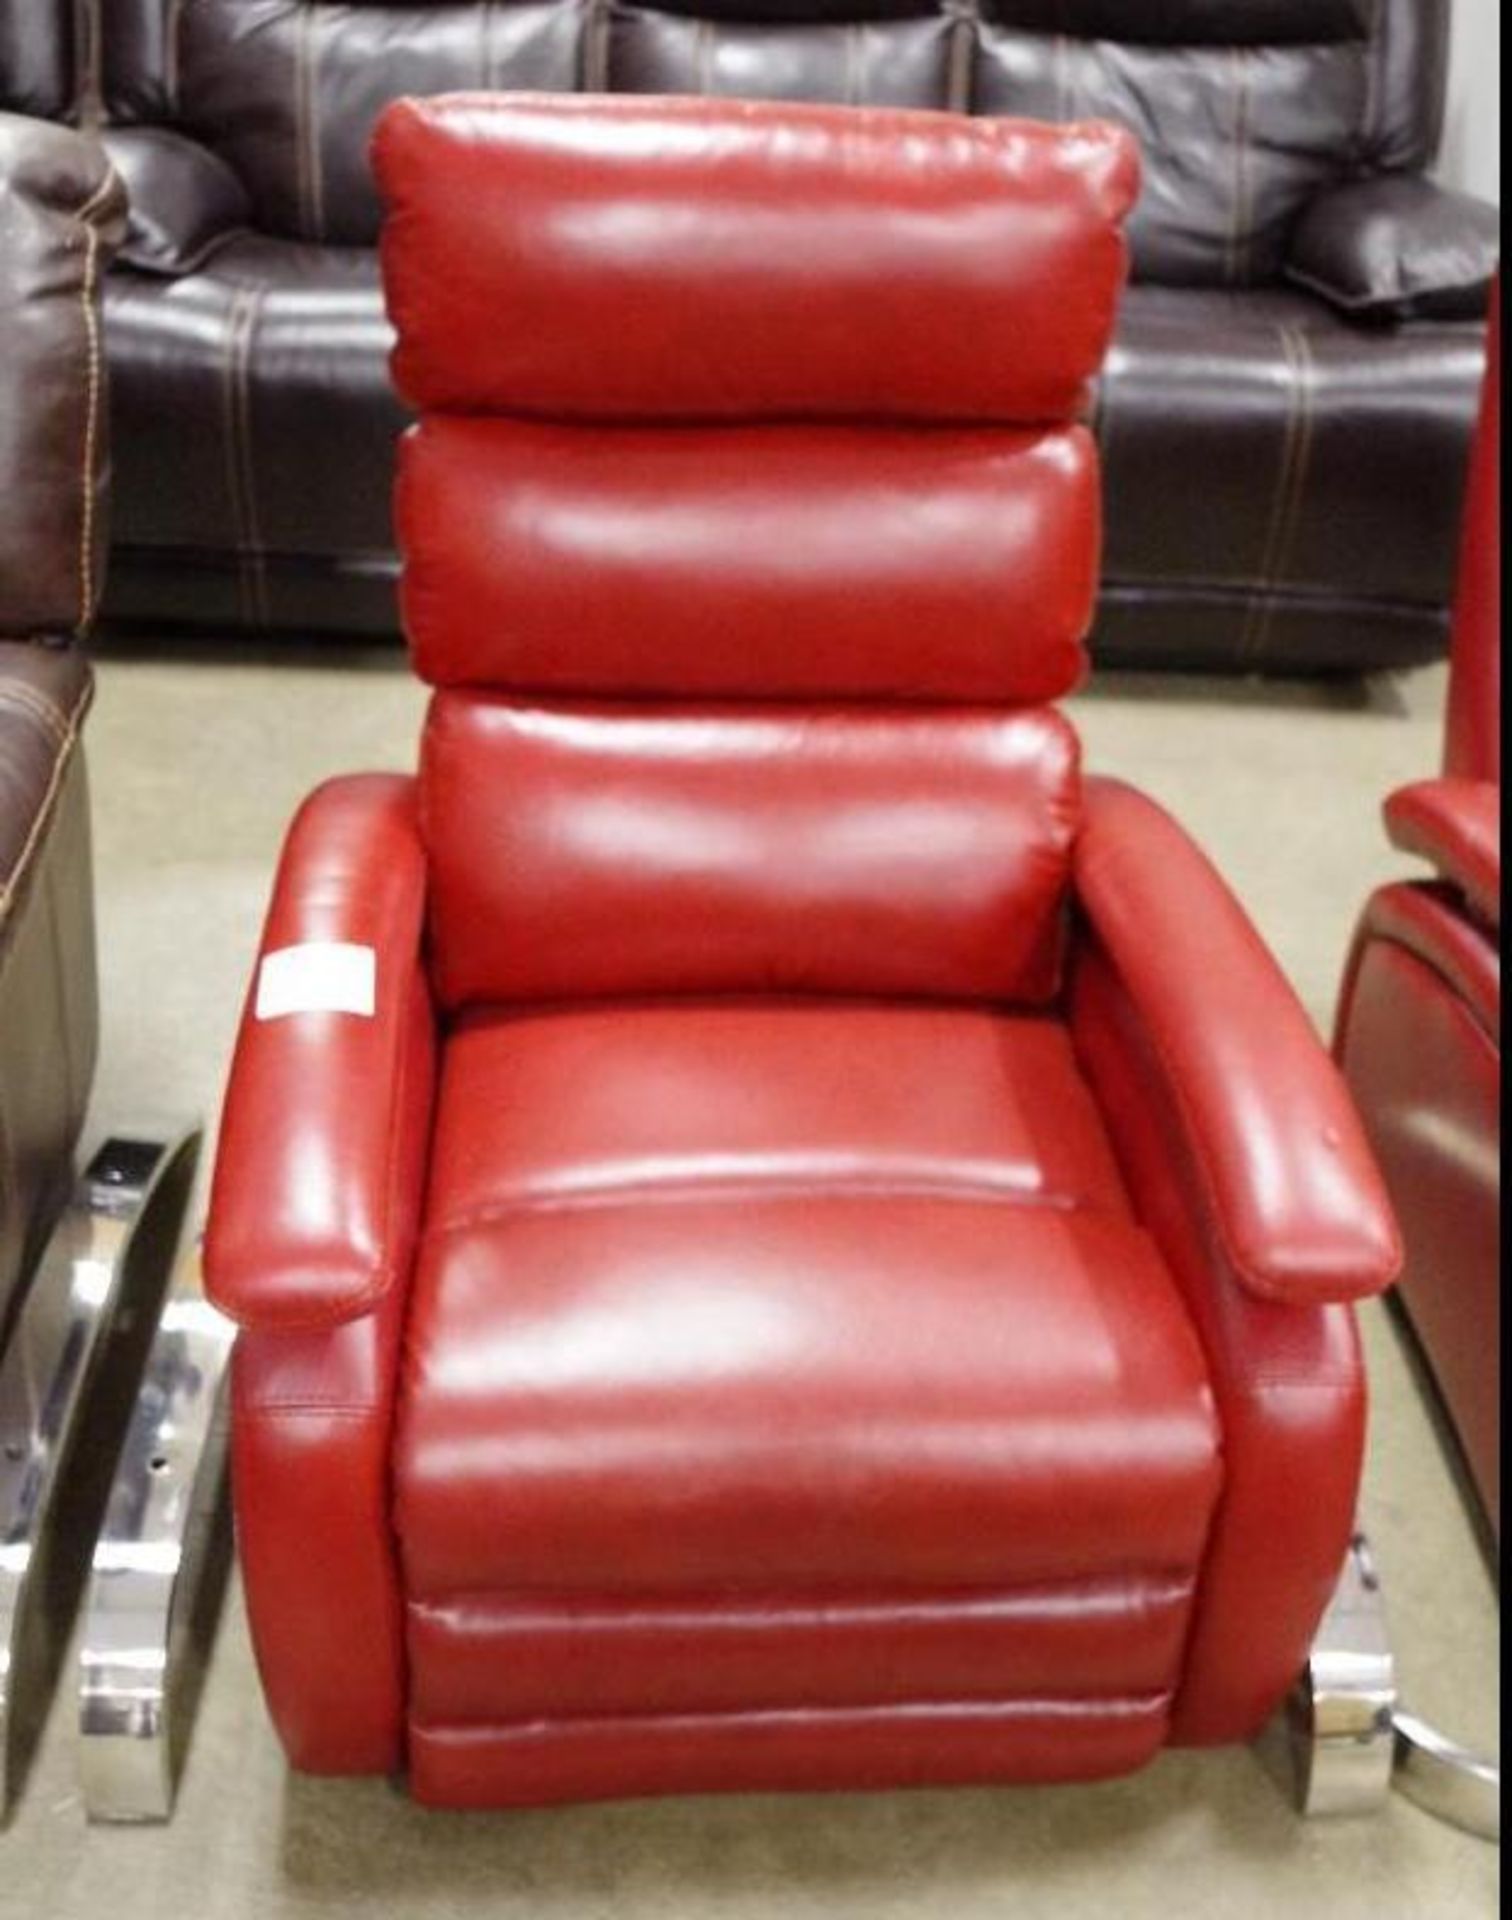 BARCALOUNGER PEGASUS Red Leather Recliner Wholesale Price: $400 each - Image 4 of 4